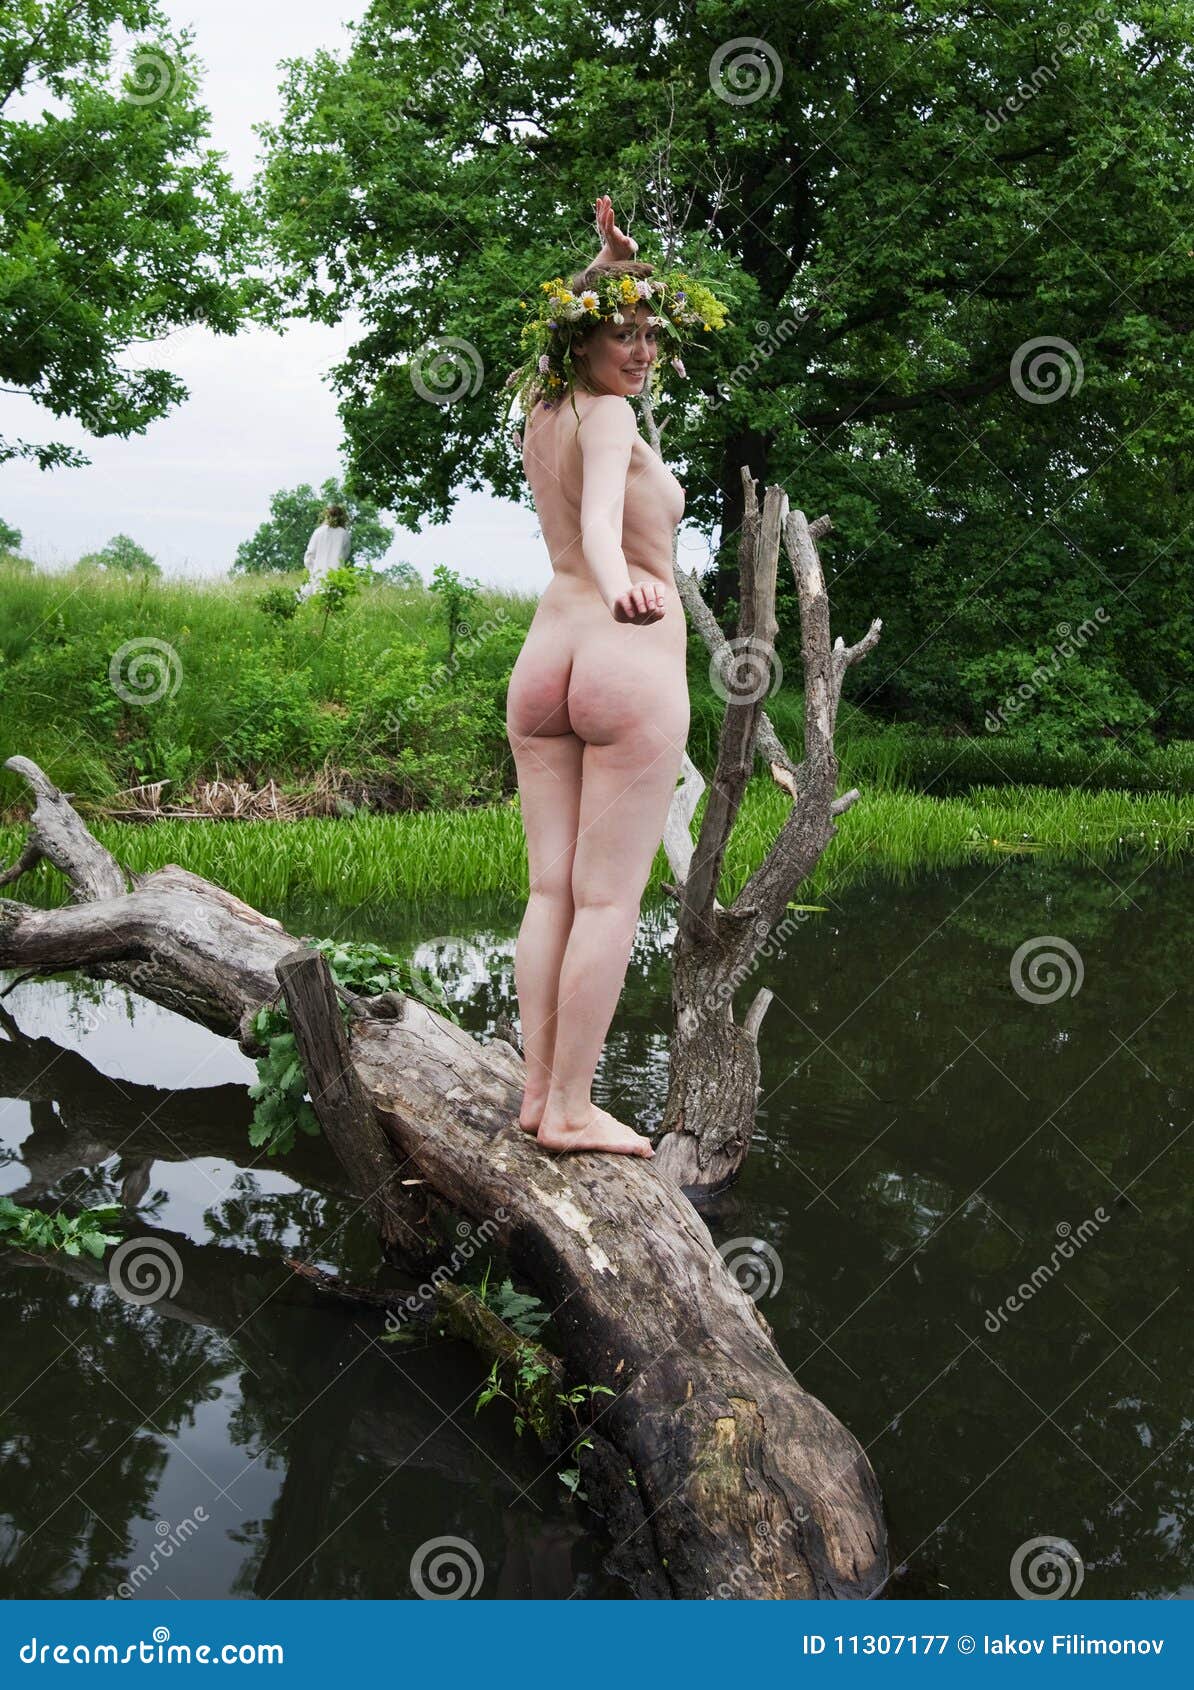 billy ray harrison recommends naked girls in nature pic